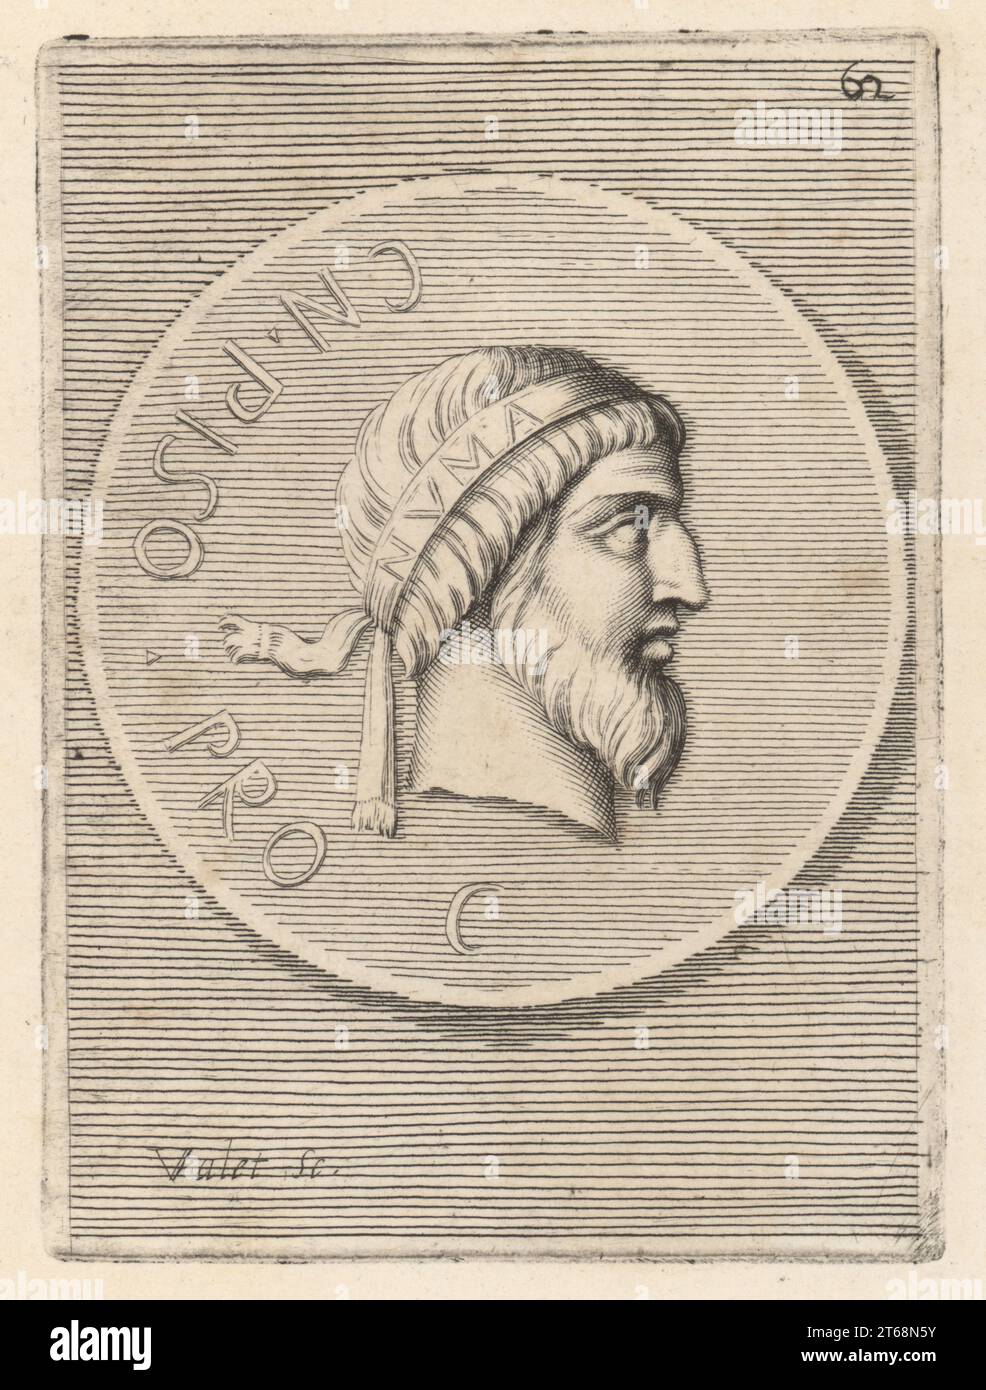 Numa Pompilius, legendary second King of Rome, of Sabine origin from Cures, c. 753-672 BC. Head of bearded man wearing a royal diadem with the letters NVMA from a bronze coin. Numa Pomilio, Secondo Re de Romani. Copperplate engraving by Guillaume Vallet after Giovanni Angelo Canini from Iconografia, cioe disegni d'imagini de famosissimi monarchi, regi, filososi, poeti ed oratori dell' Antichita, Drawings of images of famous monarchs, kings, philosophers, poets and orators of Antiquity, Ignatio deLazari, Rome, 1699. Stock Photo